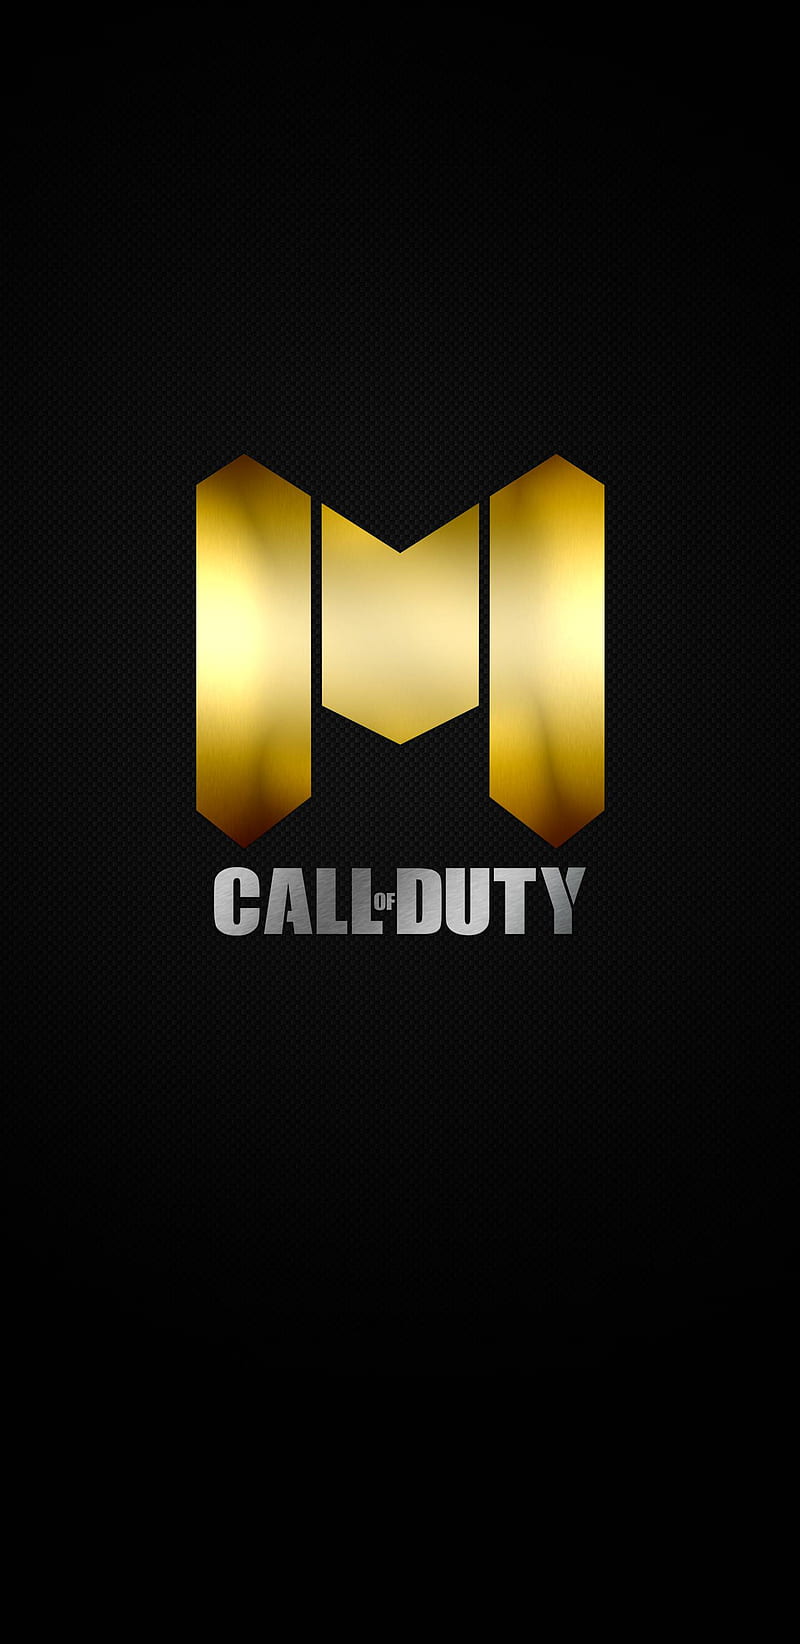 Call of duty mobile , call of duty, cod mobile, HD phone wallpaper